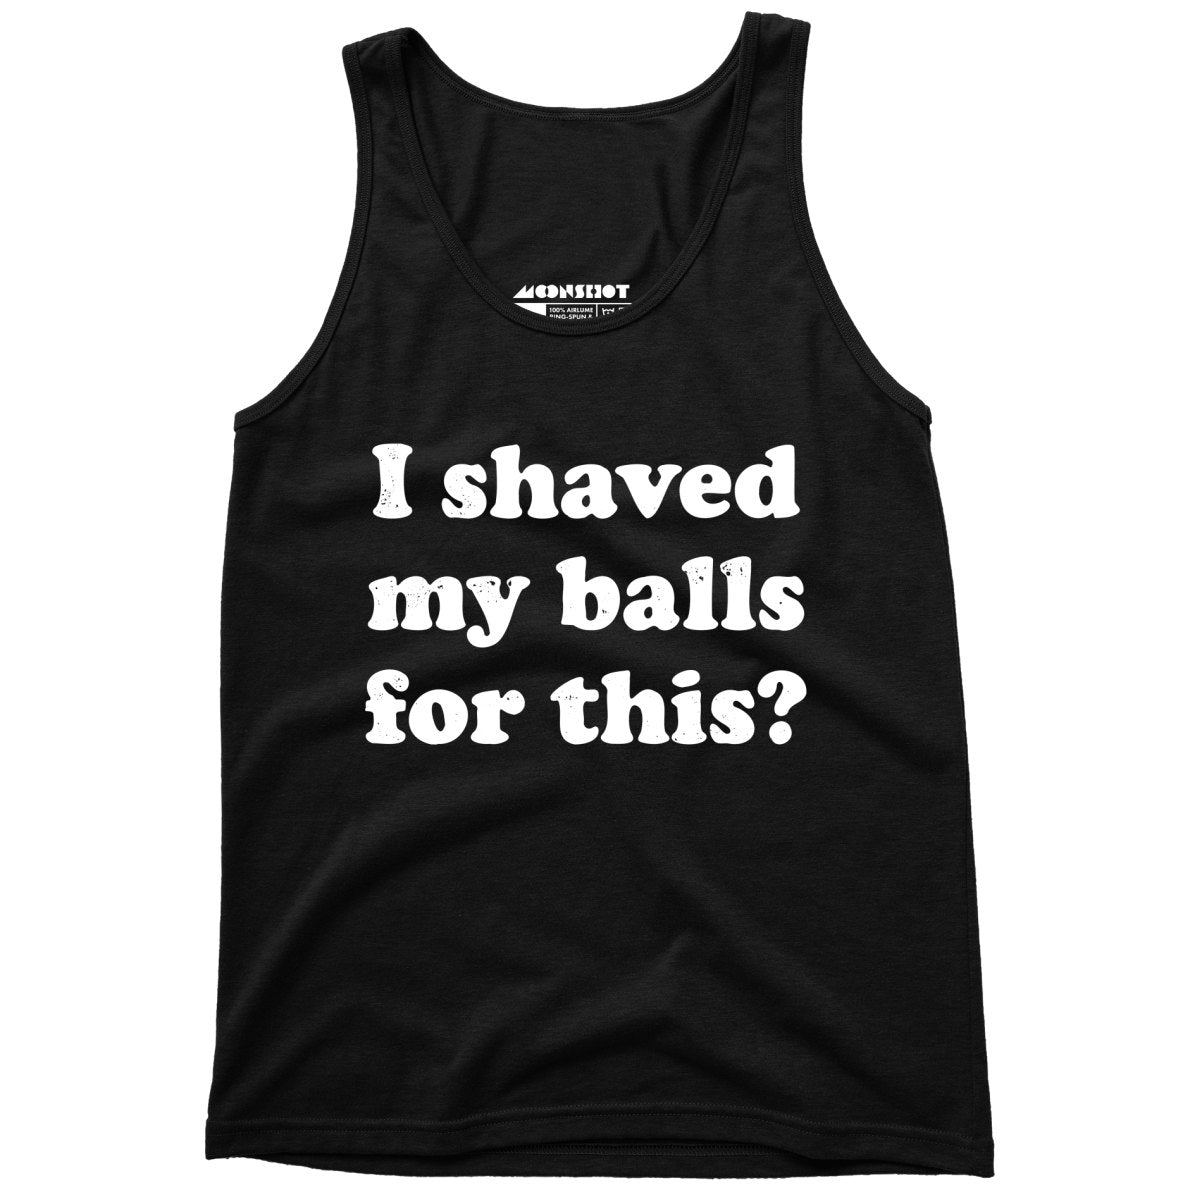 I Shaved My Balls For This? - Unisex Tank Top